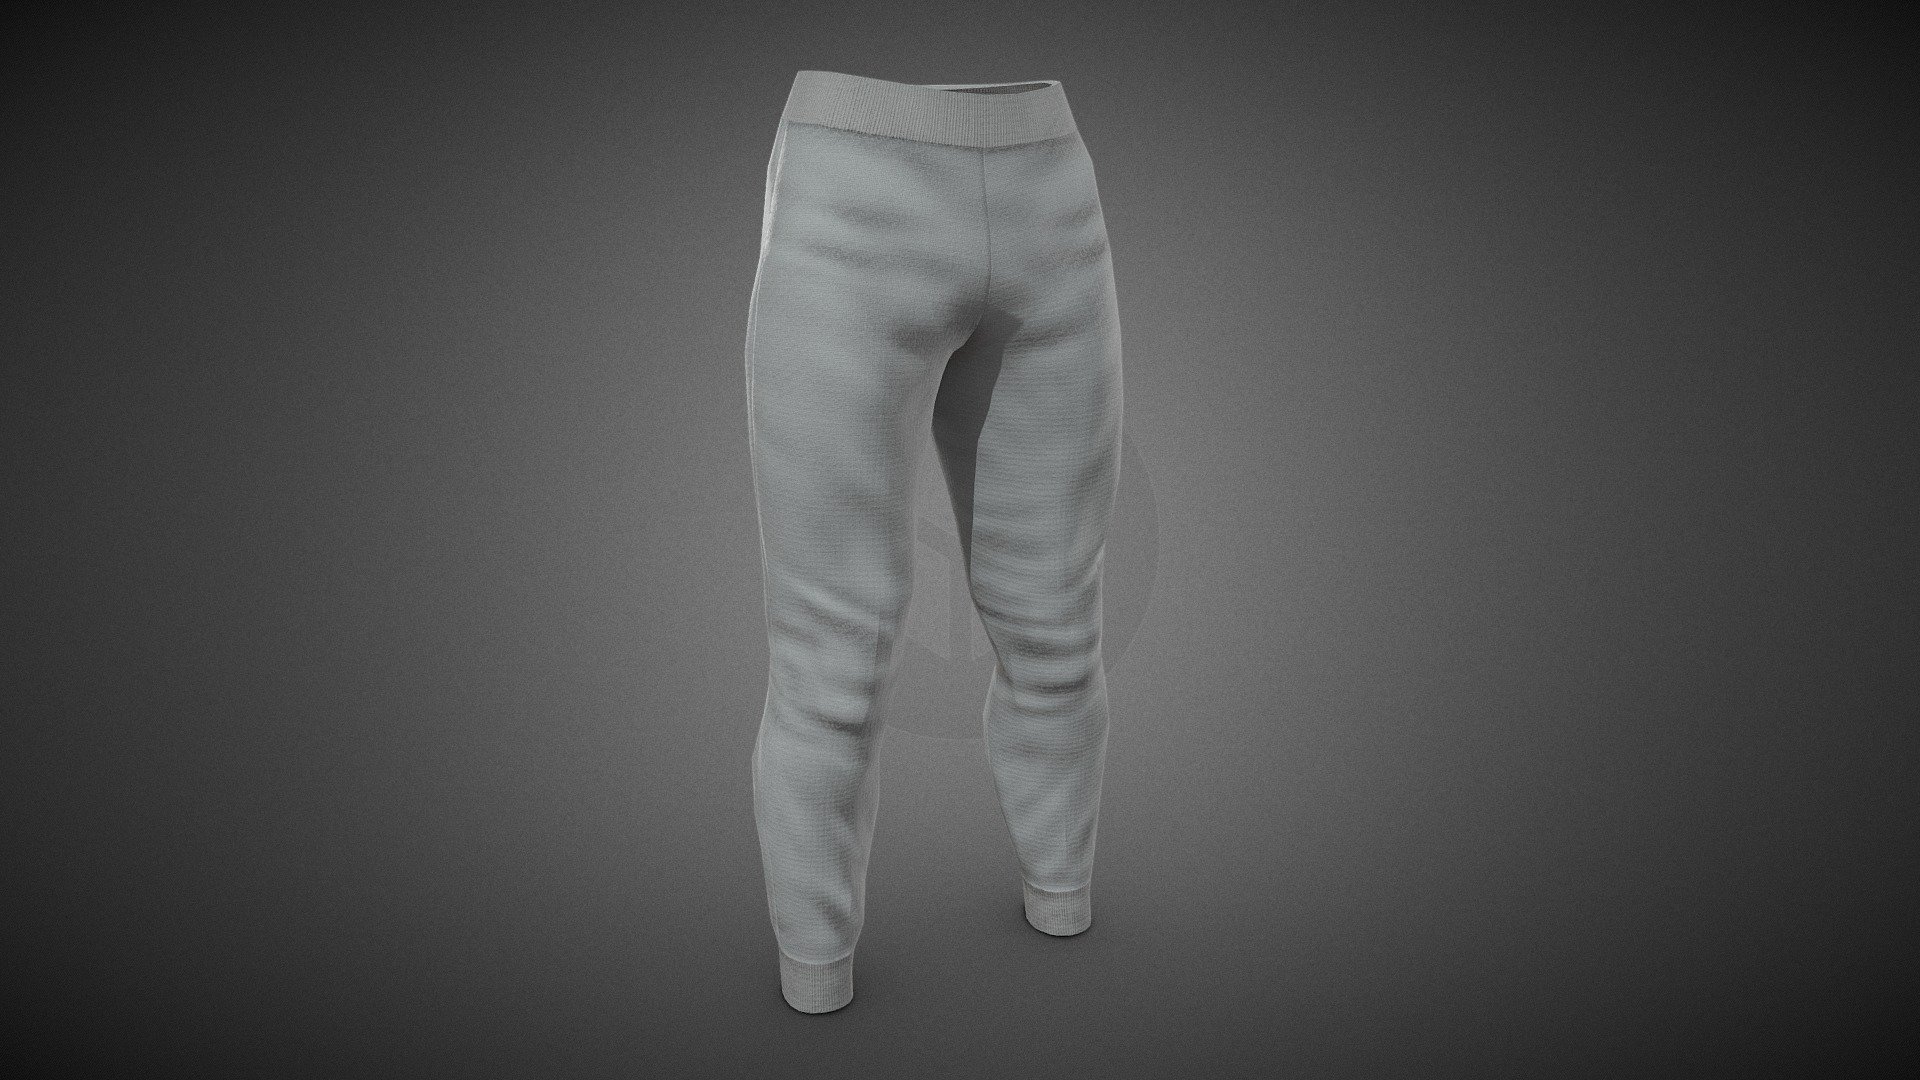 CG StudioX Present :
Gray Men's Sport Pants lowpoly/PBR


This is Gray Men's Sport Pants Comes with Specular and Metalness PBR.
The photo been rendered using Marmoset Toolbag 4 (real time game engine )

Features :

Comes with Specular and Metalness PBR 4K texture .
Good topology.
Low polygon geometry.
The Model is prefect for game for both Specular workflow as in Unity and Metalness as in Unreal engine .
The model also rendered using Marmoset Toolbag 4 with both Specular and Metalness PBR and also included in the product with the full texture.
The texture can be easily adjustable .

Texture :

One set of UV [Albedo -Normal-Metalness -Roughness-Gloss-Specular-Ao] (4096*4096)

Files :
Marmoset Toolbag 4 ,Maya,,FBX,OBj with all the textures.


Contact me for if you have any questions.
 - Gray Men's Sport Pants - Buy Royalty Free 3D model by CG StudioX (@CG_StudioX) 3d model